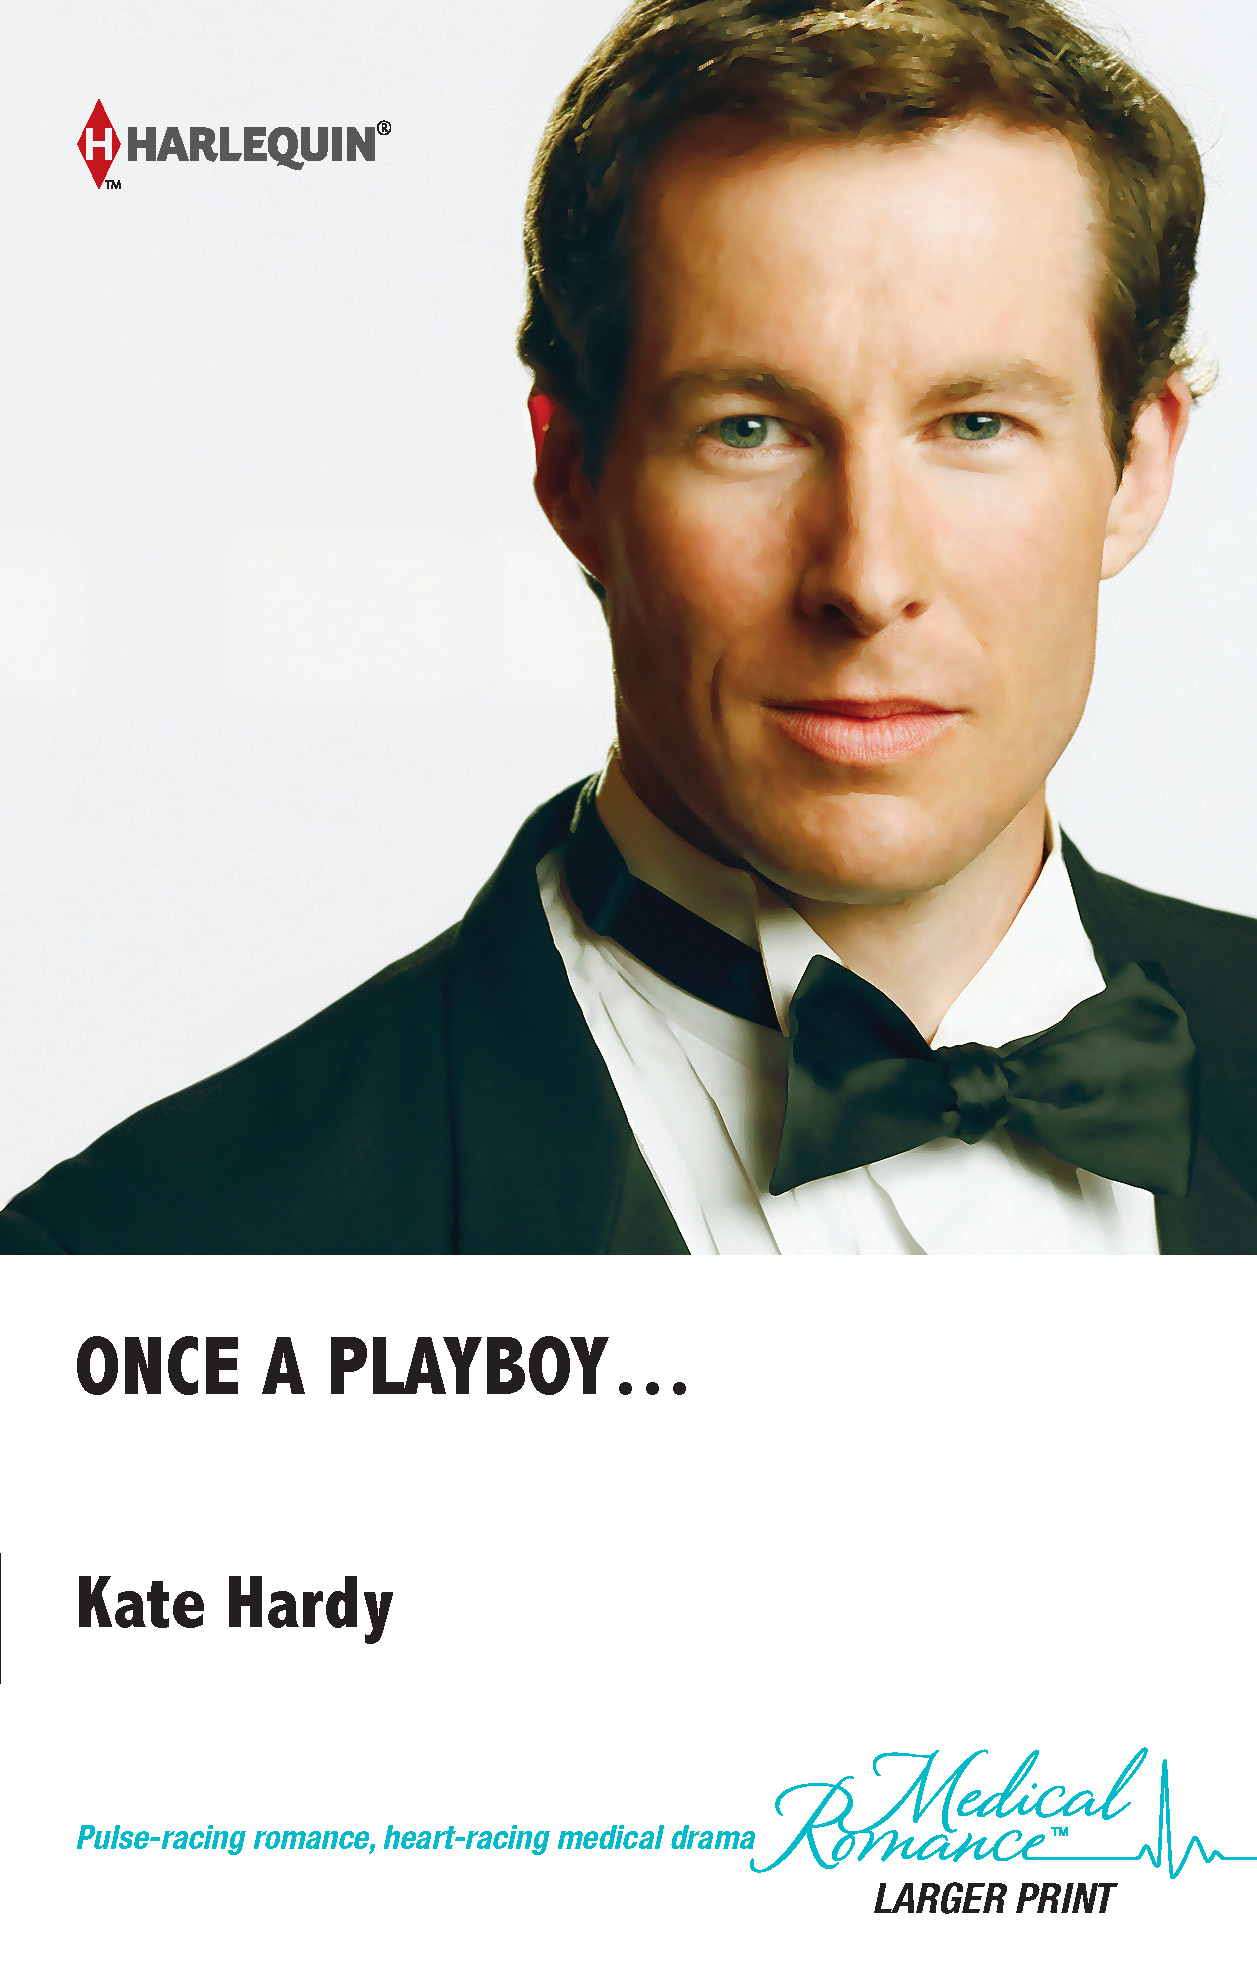 Once a Playboy... (2012) by Kate Hardy